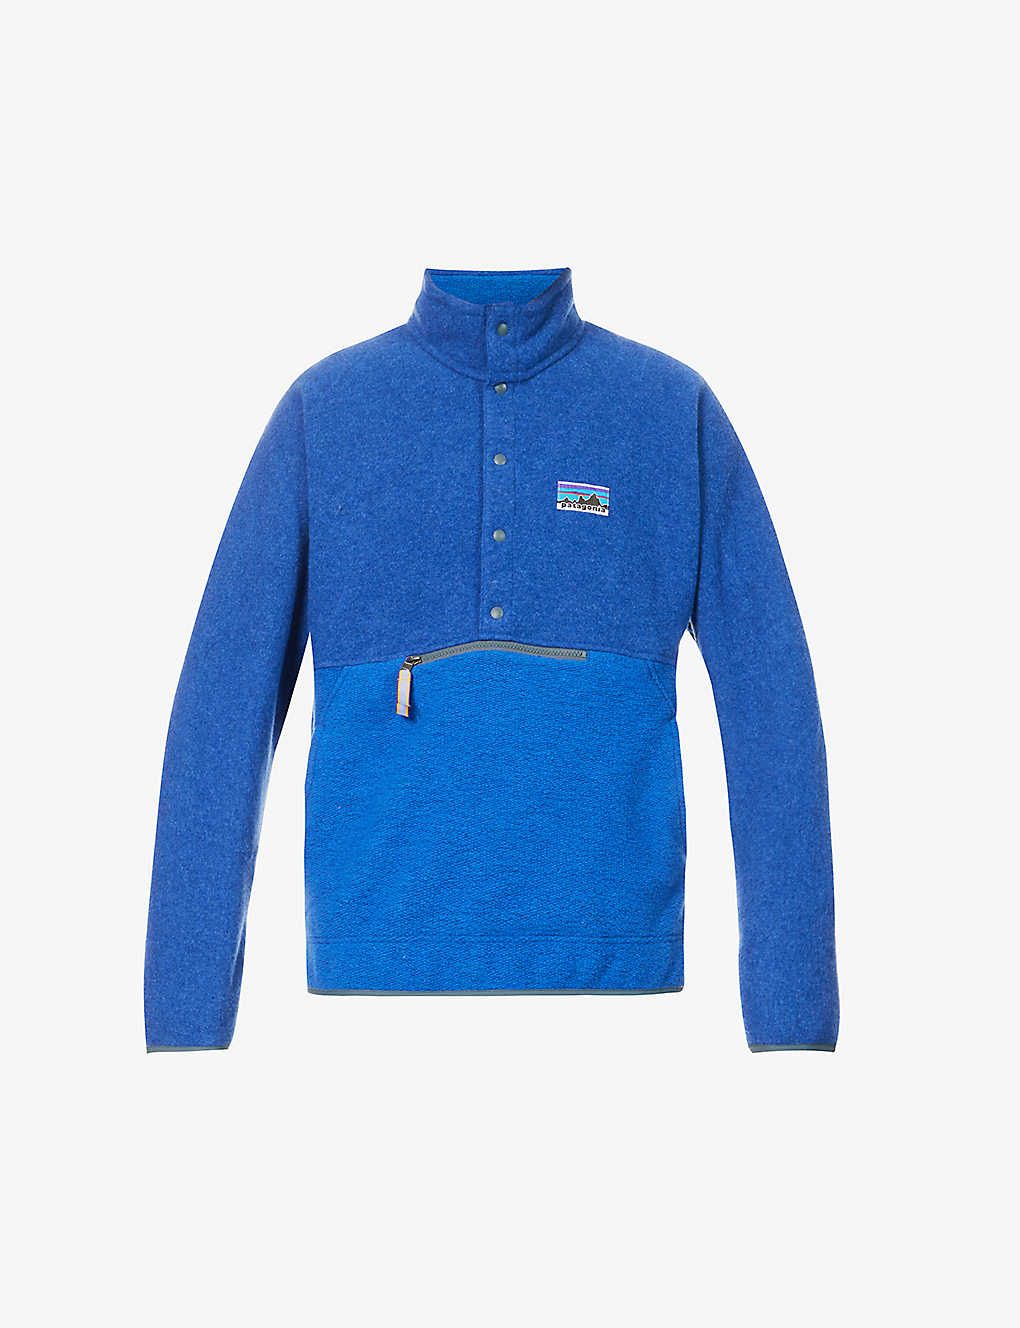 Patagonia Mens Passage Blue Snap-t Brand-patch Recycled-fleece Jacket